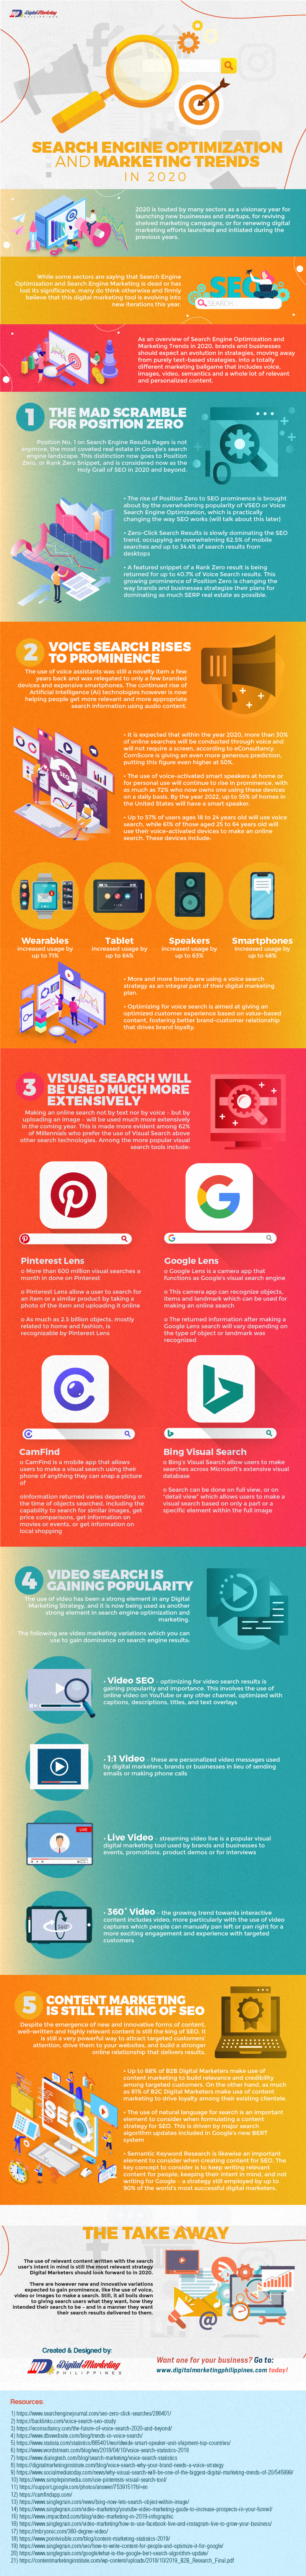 Search Engine Optimization and Marketing Trends in 2020 (Infographic) - An Infographic from Digital Marketing Philippines